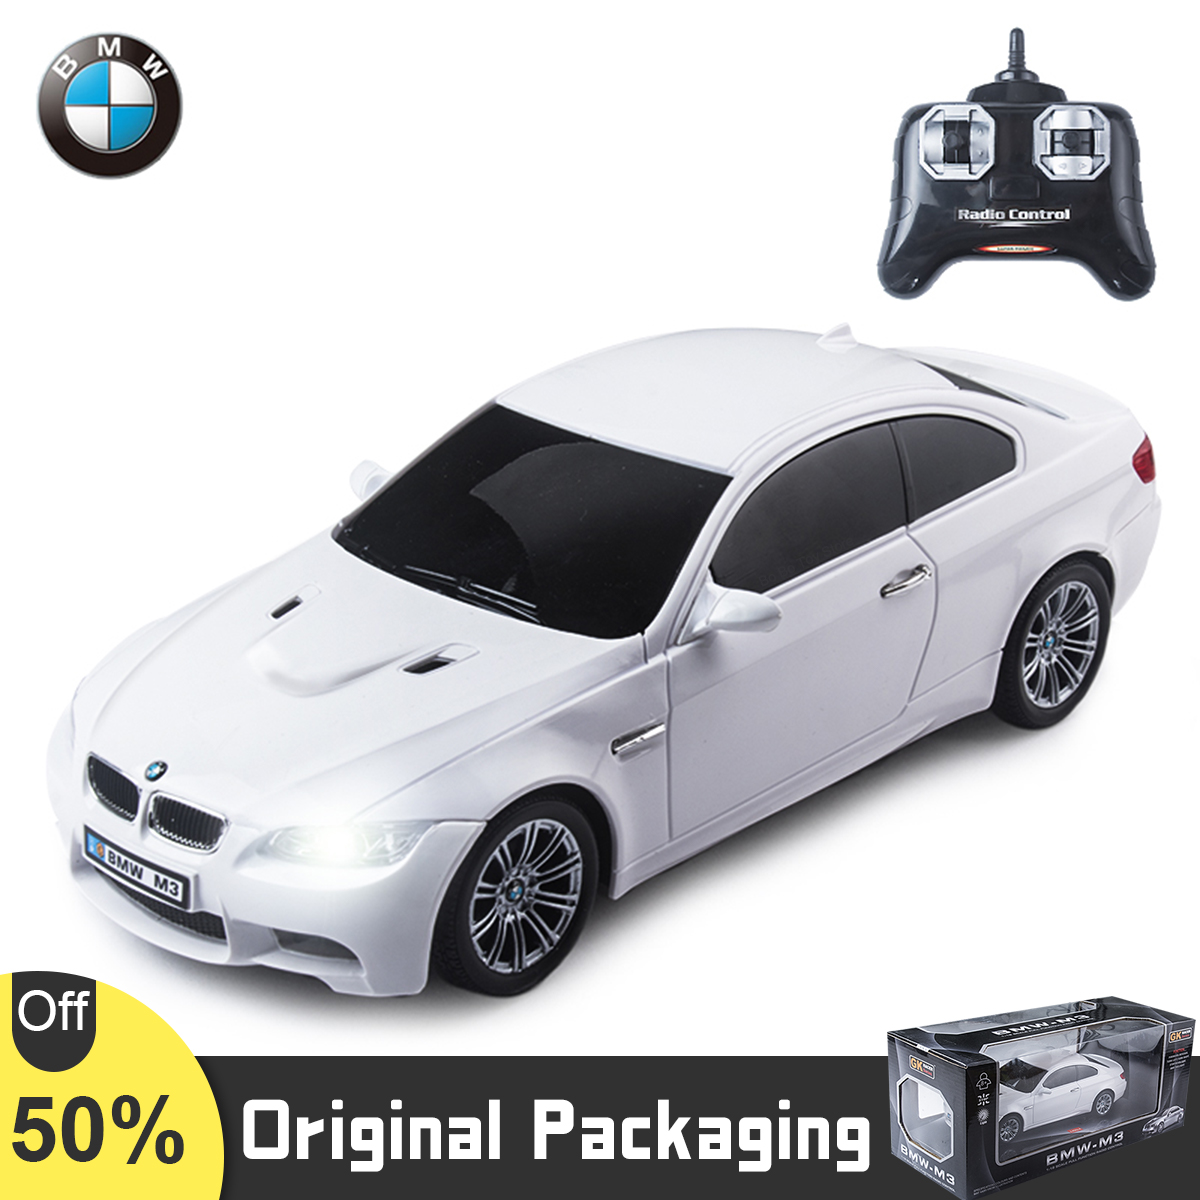 1:24 BMW M3 Channels RC Car with Led Light 2.4G Remote Control Drift Vehicle Racing Sports Car Model Toys Kids Collection Gifts